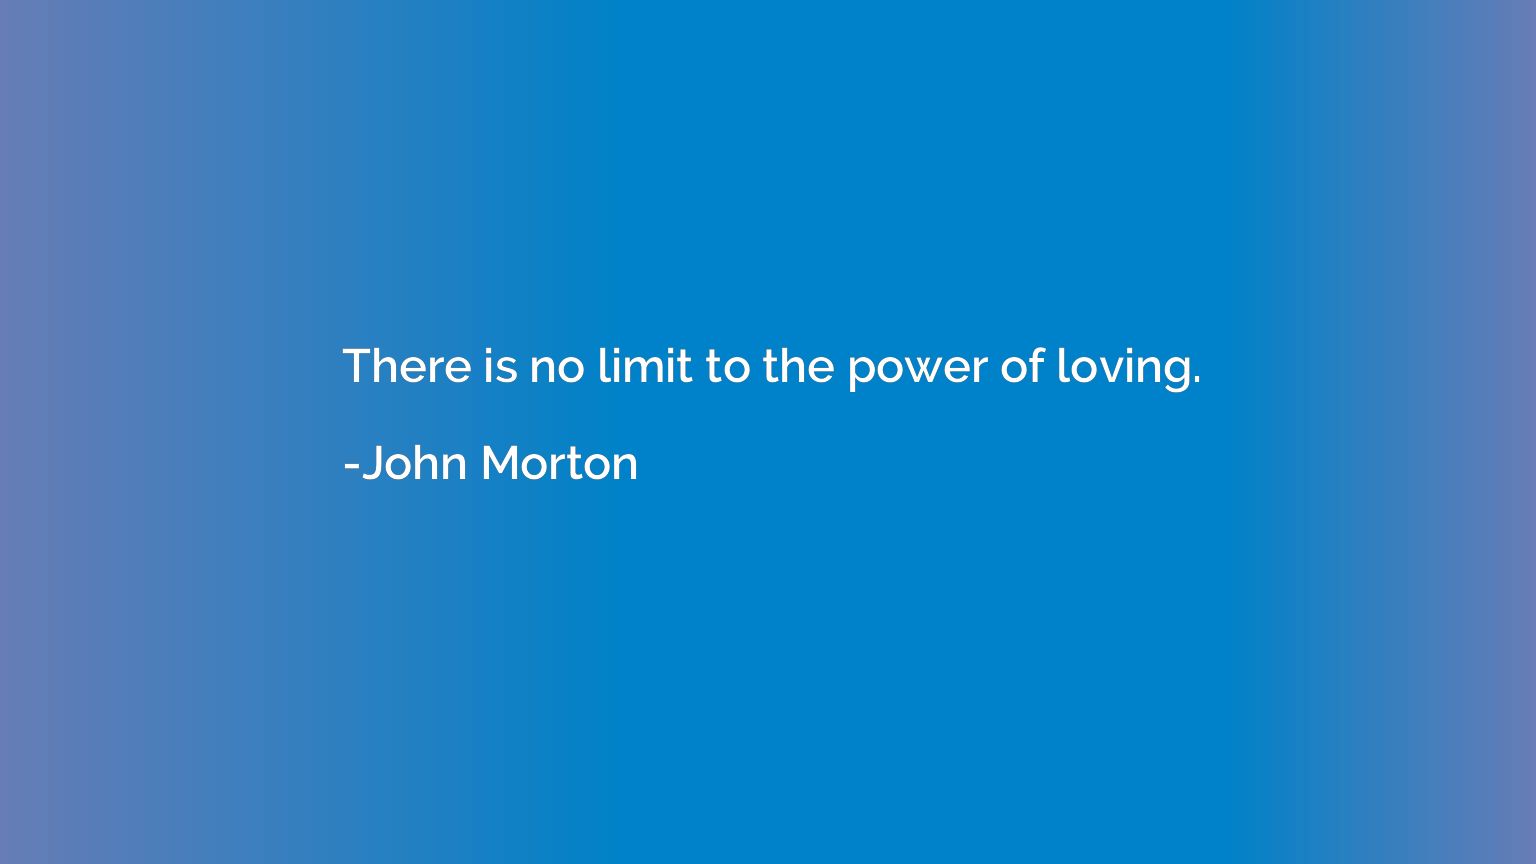 There is no limit to the power of loving.